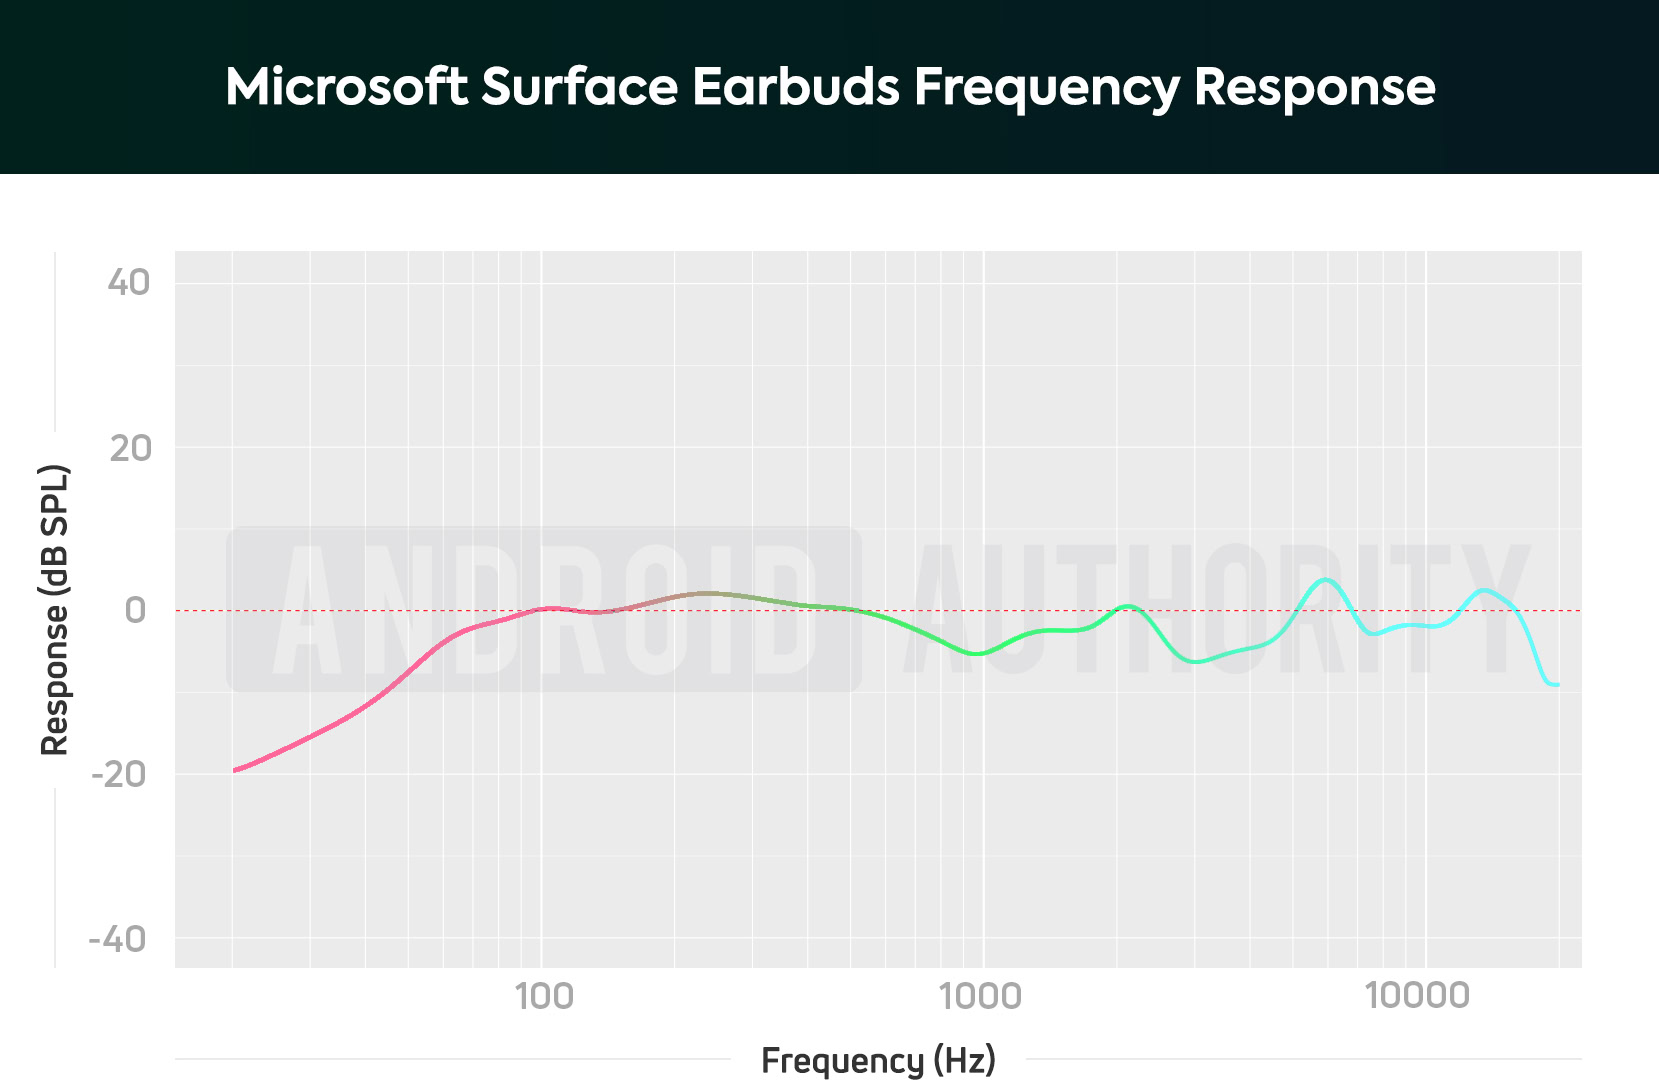 Microsoft Surface Earbuds AA frequency response chart